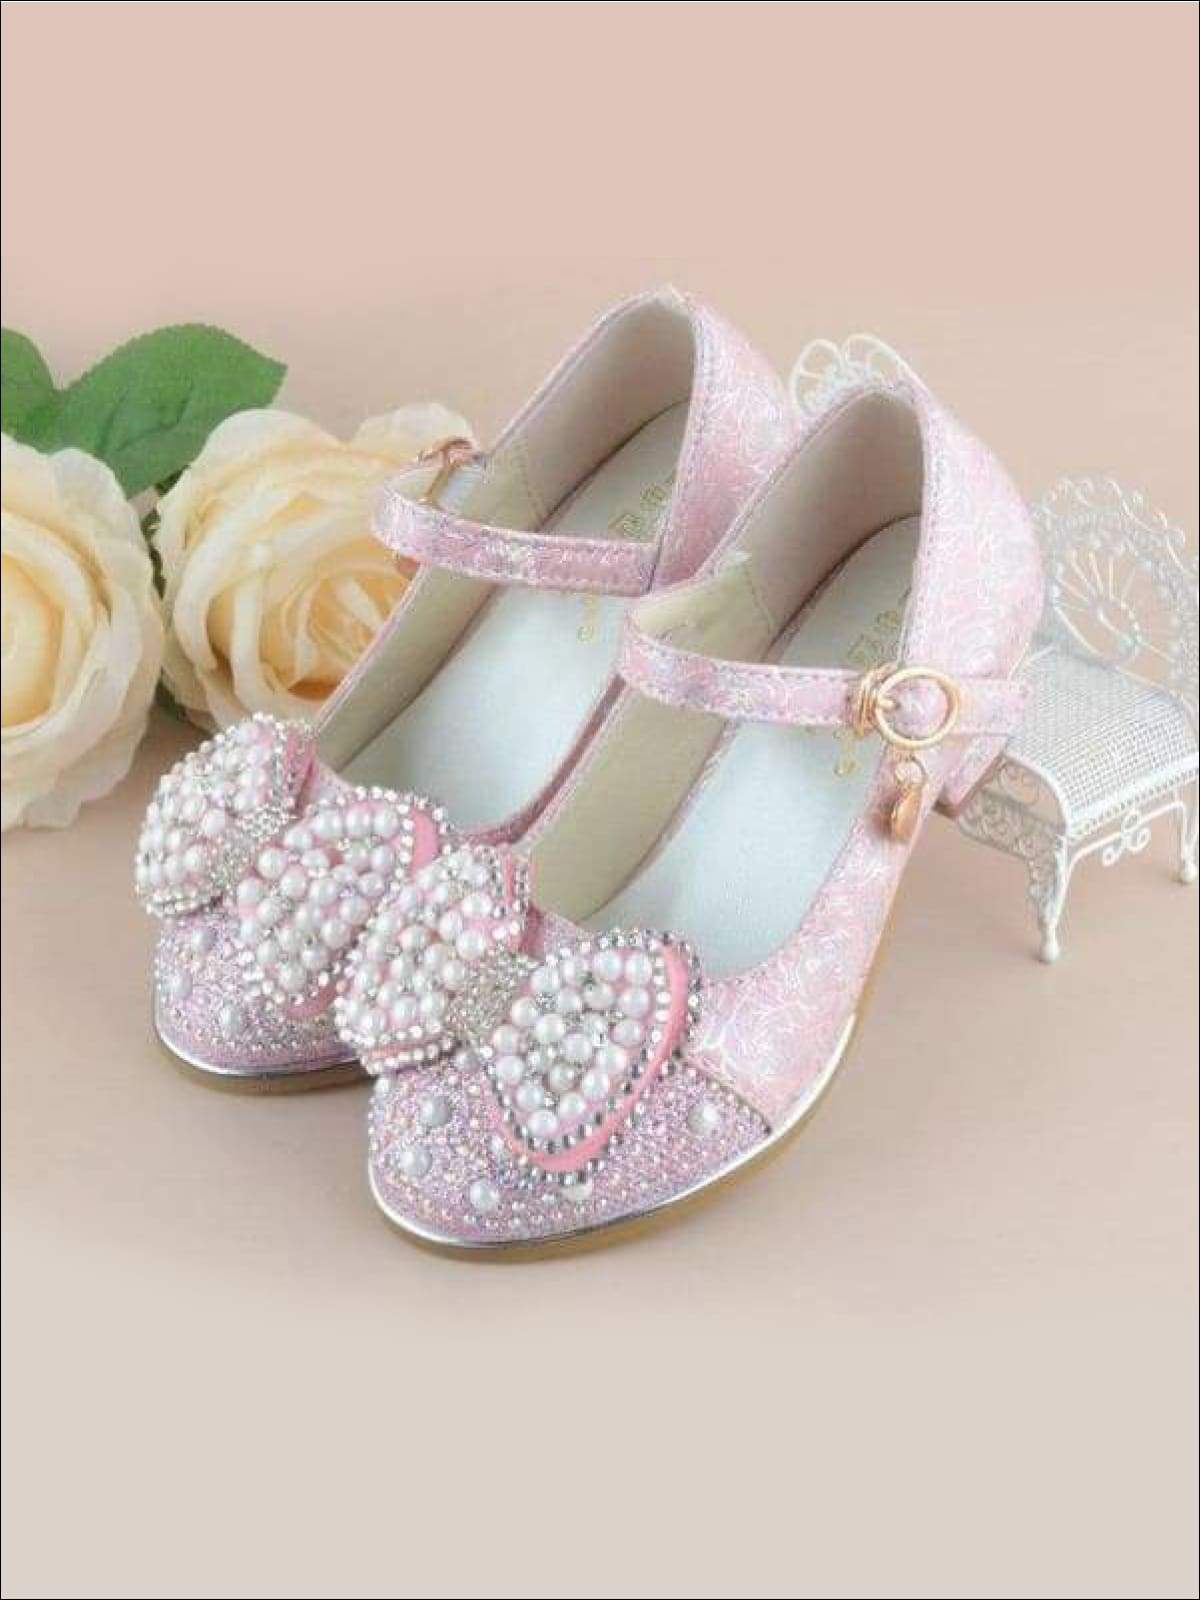 Girls Pearl Embellished Bow Tie Flats with Mini Heel - Girls Flats